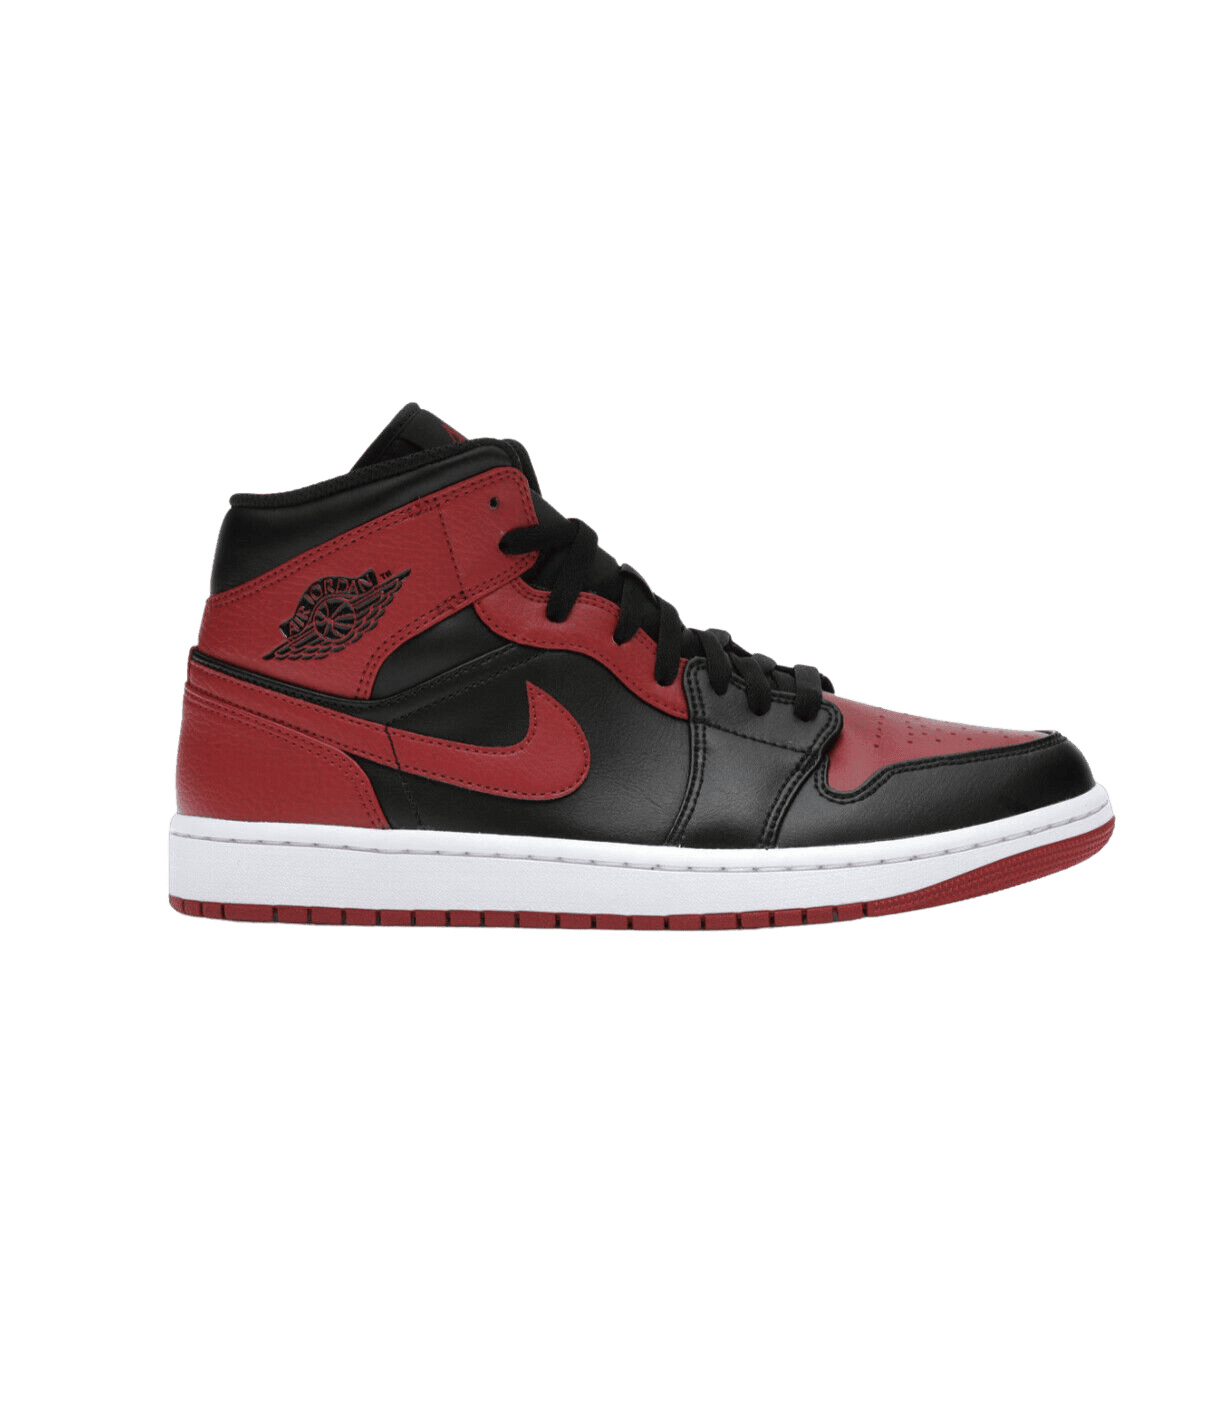 Everything You Need to Know About the 1985 Jordan 1 Bred | eBay